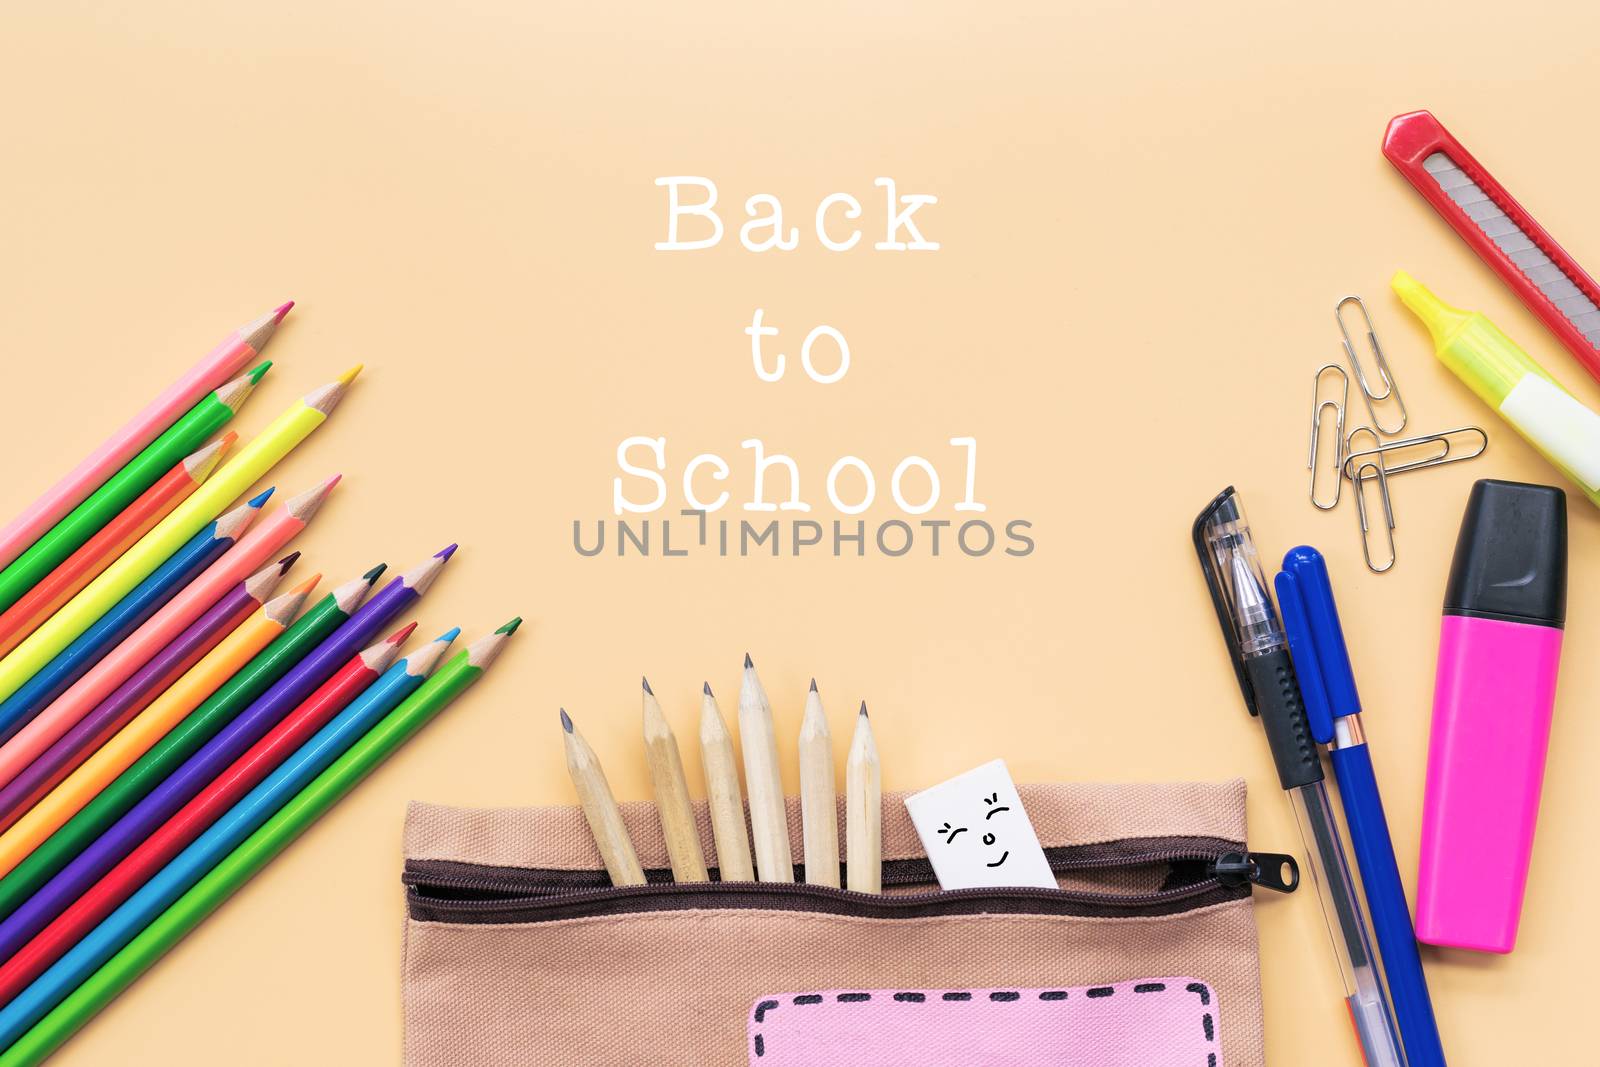 Welcome back to school background, colorful color pencil and stationery bag on yellow backgrounds with copy space